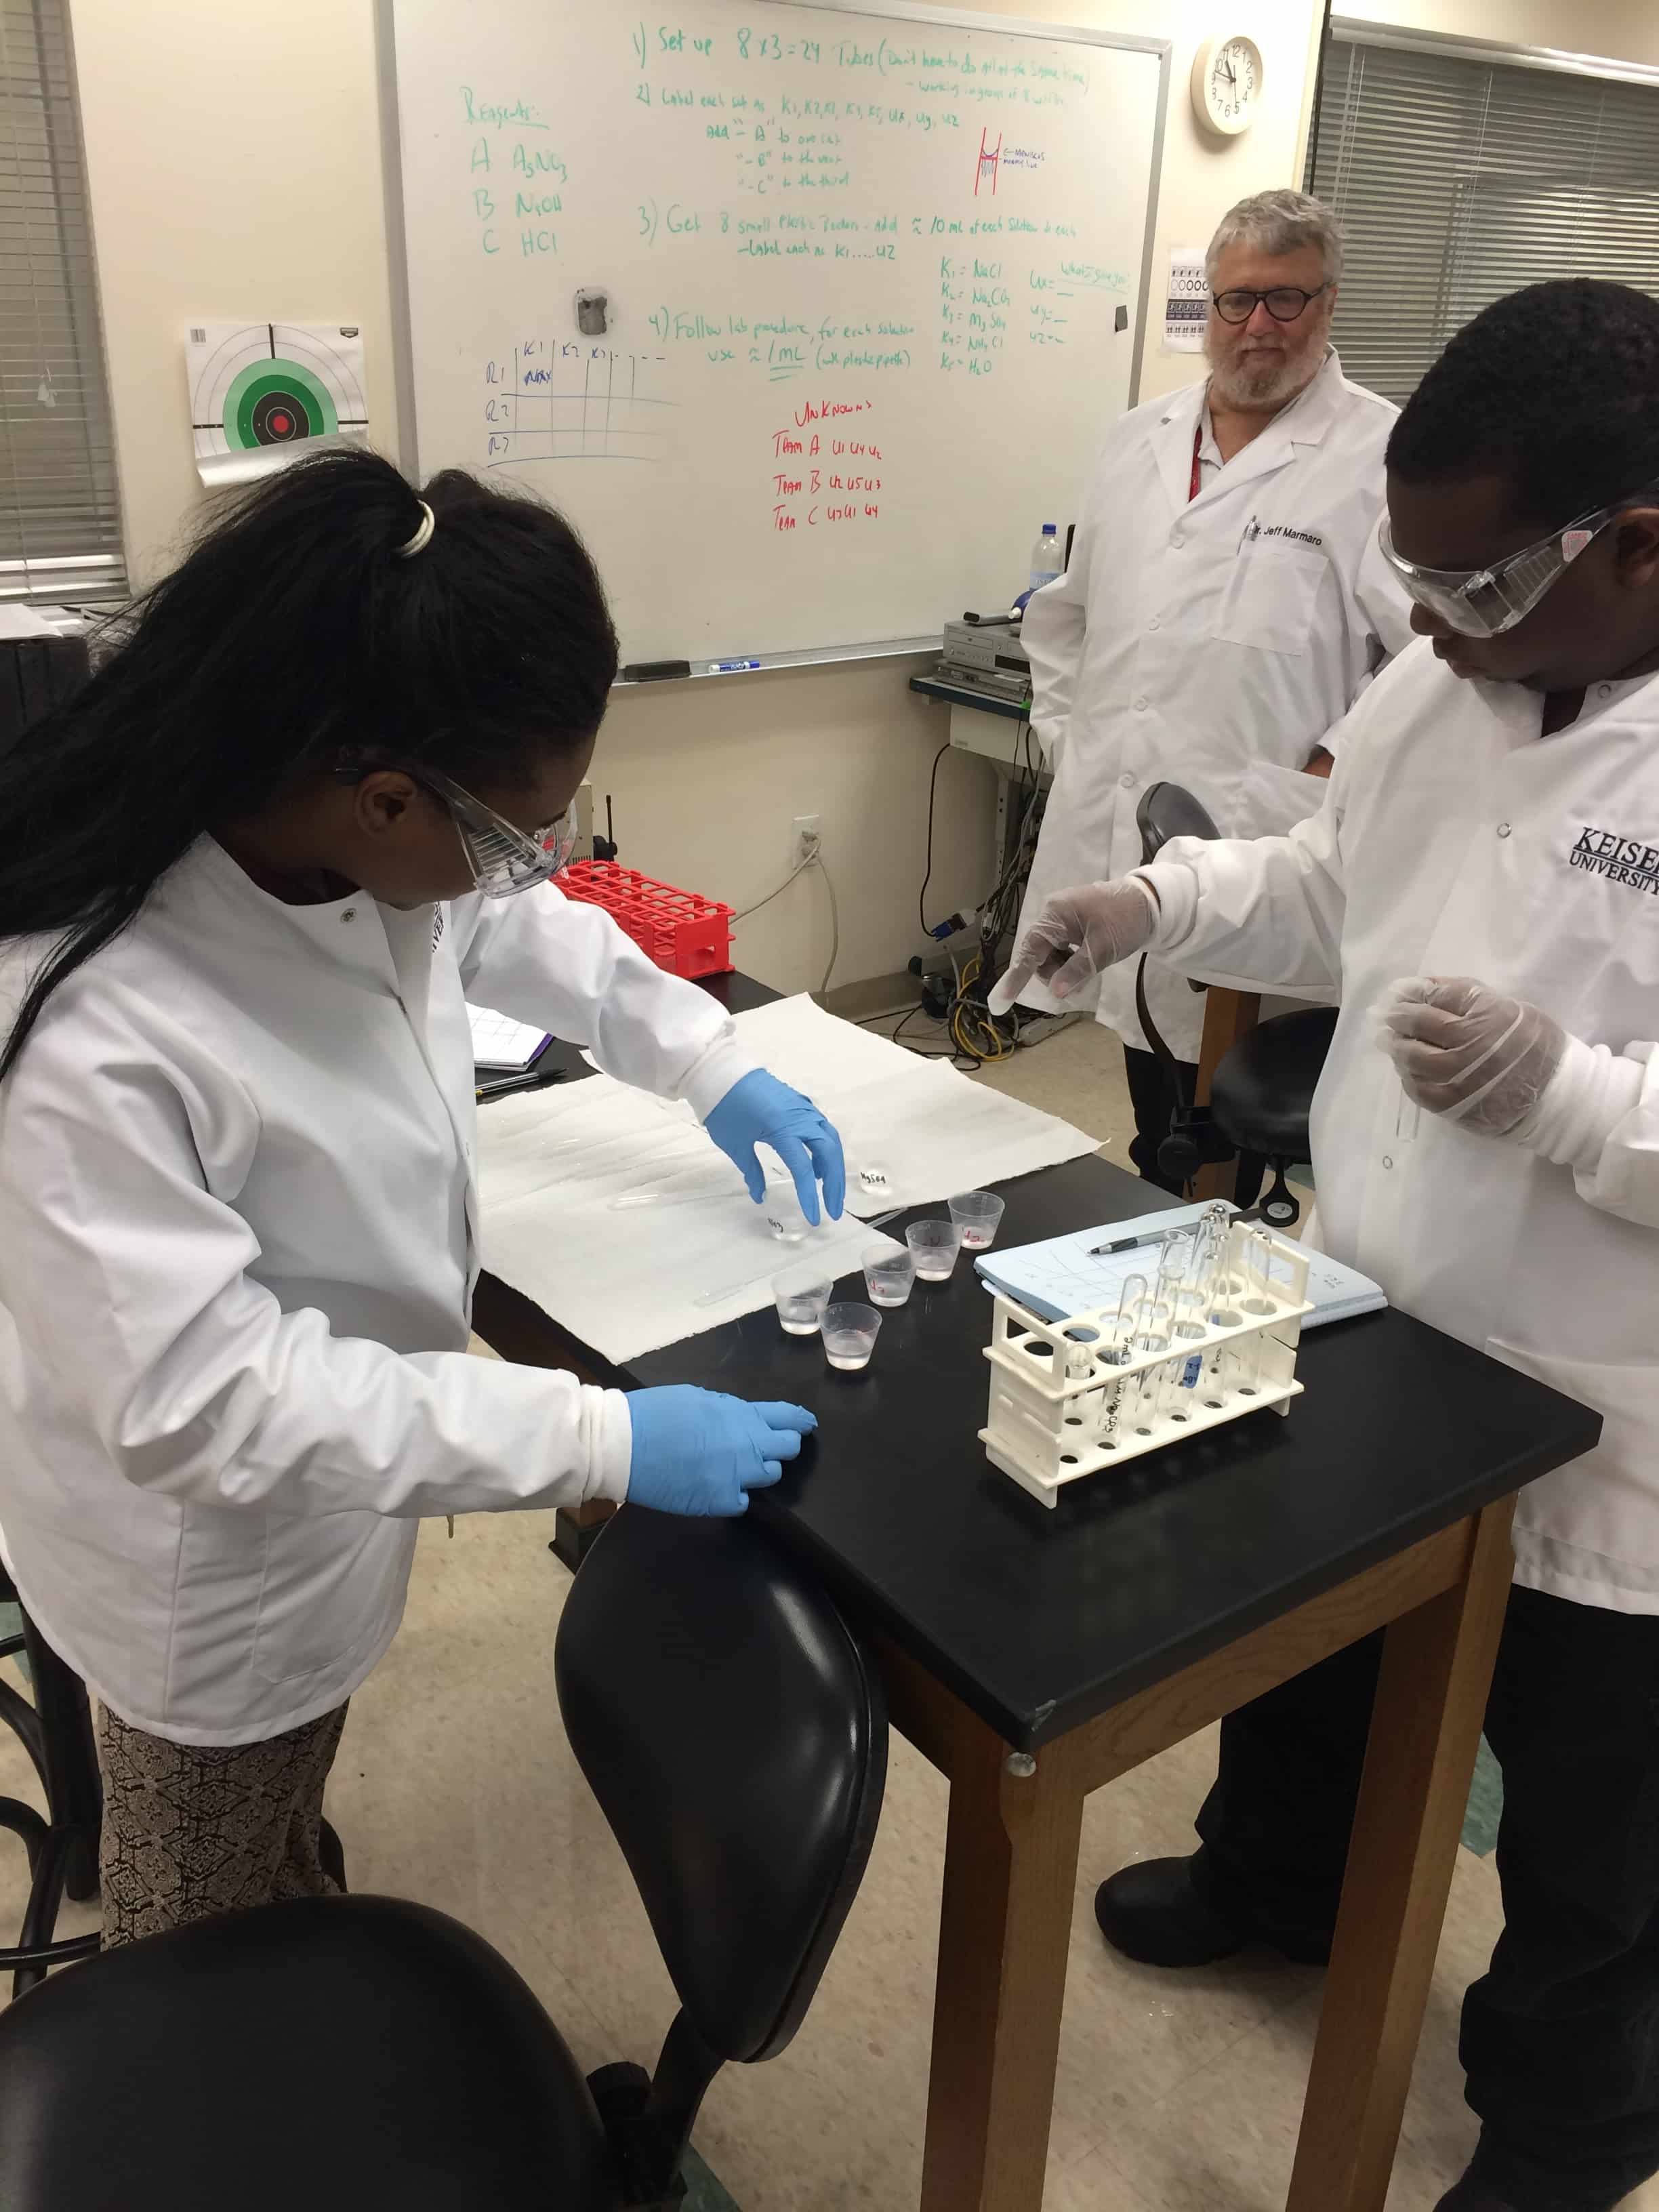 Chemistry Experiments Take Place in Sarasota